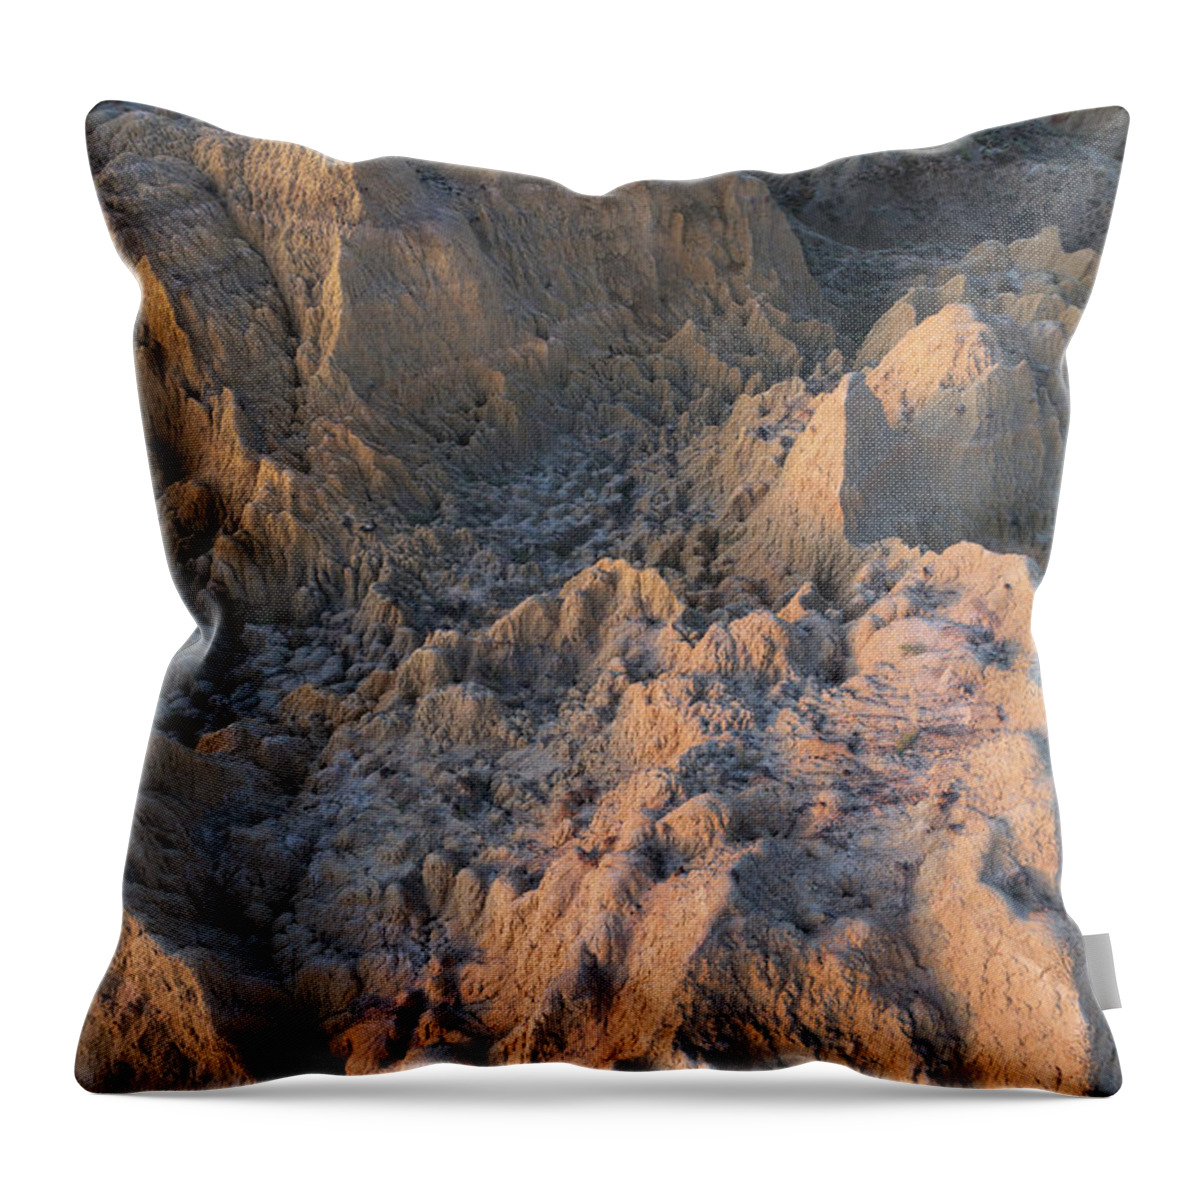 Wyoming Throw Pillow featuring the photograph Texture by Dustin LeFevre